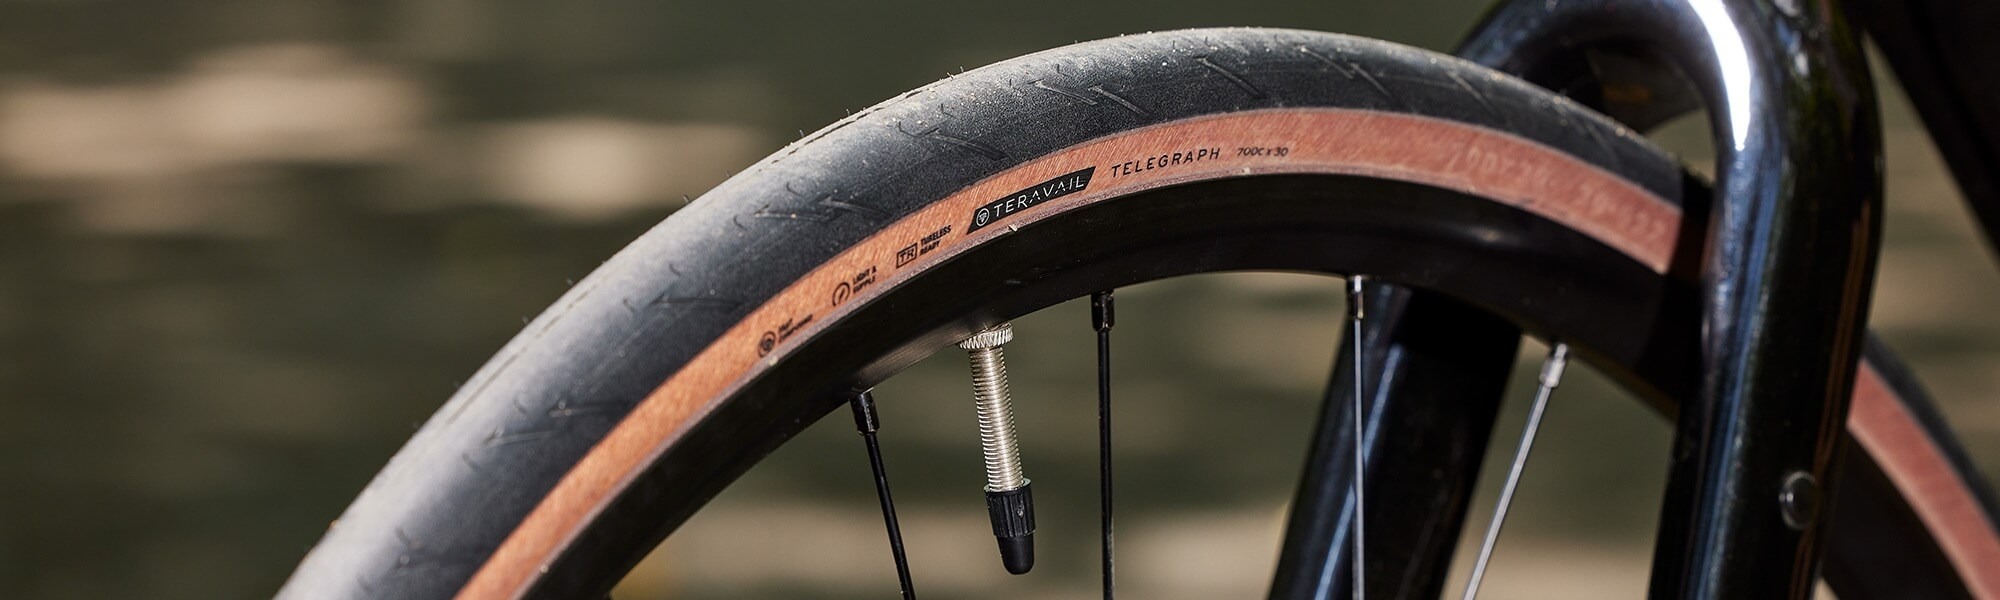 Closeup of a bike's front wheel and tire. The Teravail Telegraph tire hotpatch and sidewall are visible.